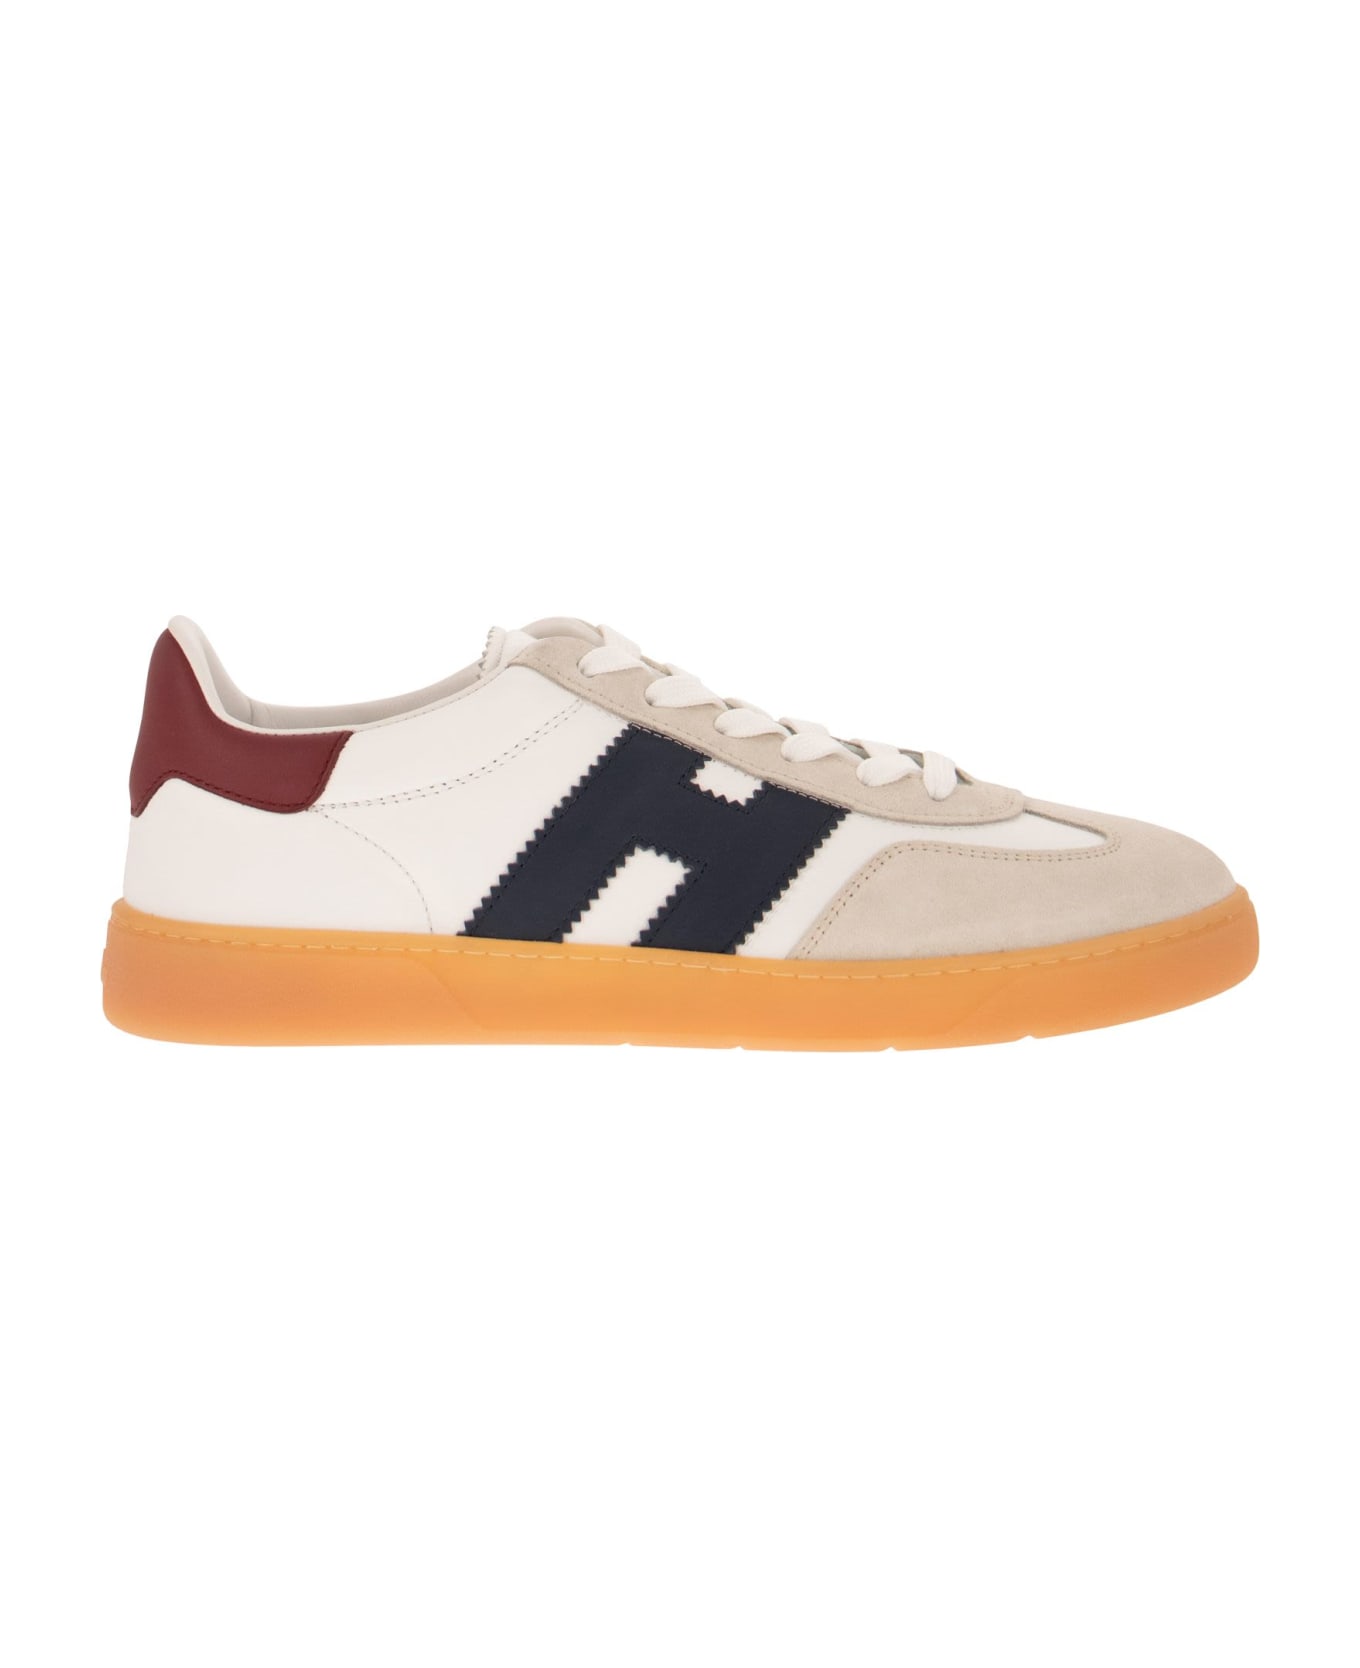 Hogan Cool Sneakers In Leather And Suede - White